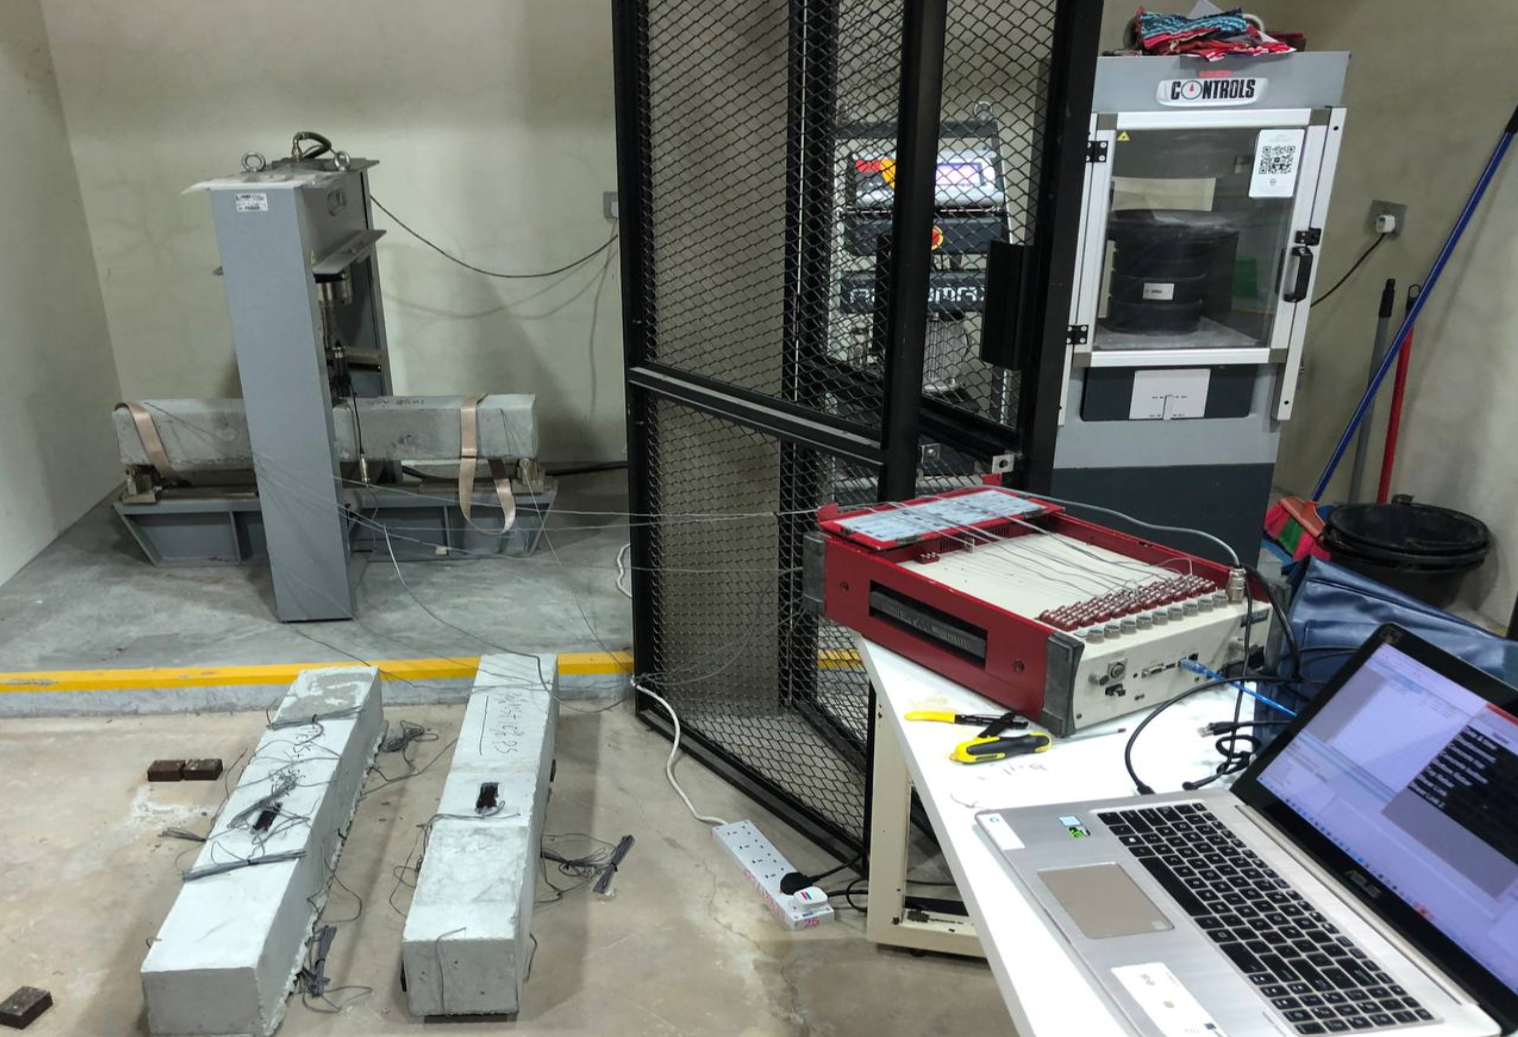 Beams under flexure and displacement testing, with sensors wired to a datalogger